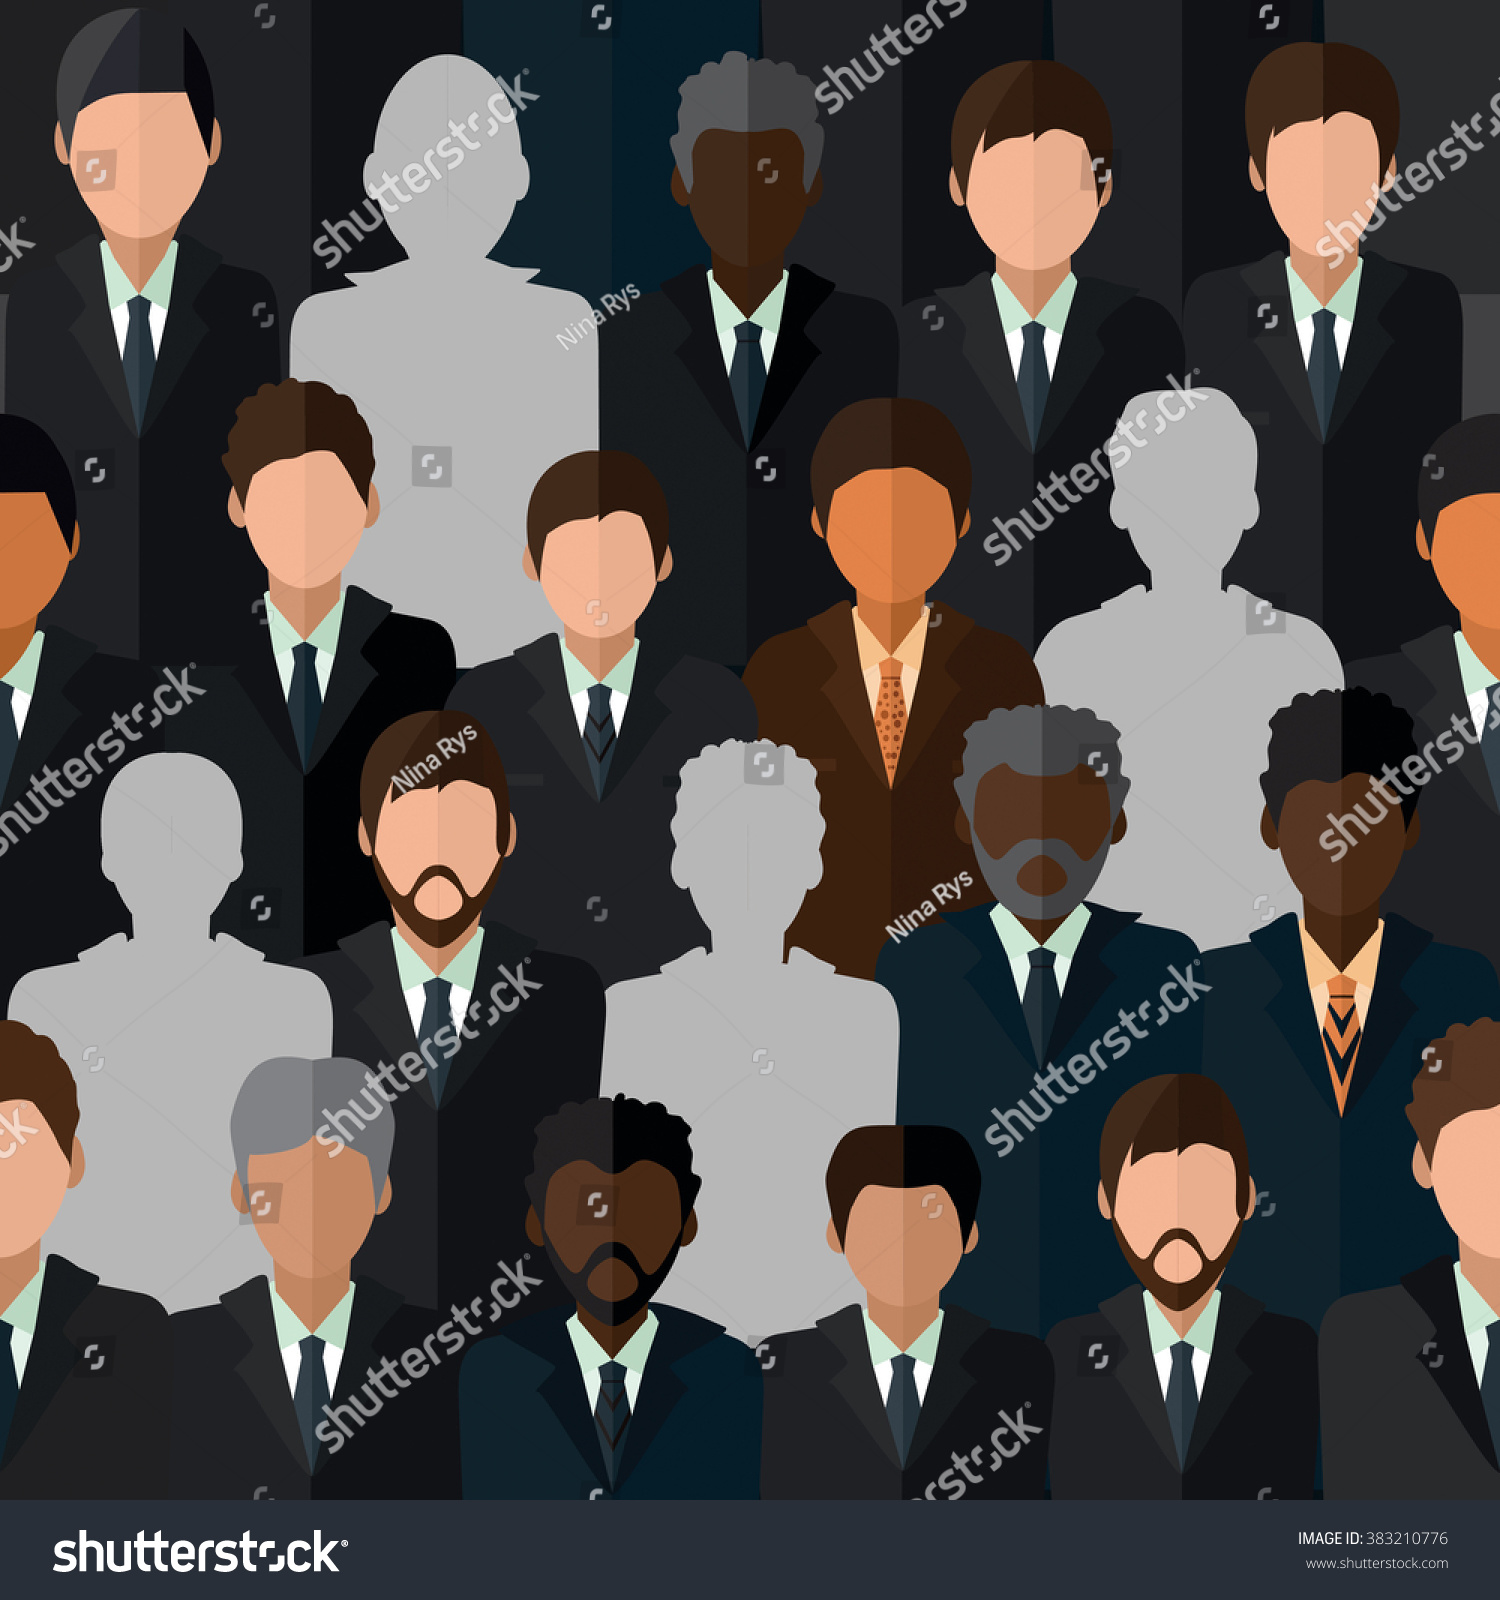 SVG of Vector  illustration or seamless background  . A men. Some depicted the silhouettes, it illustrates the social problems (viral infection, drug abuse, illiteracy, disease, unemployment and so on) svg